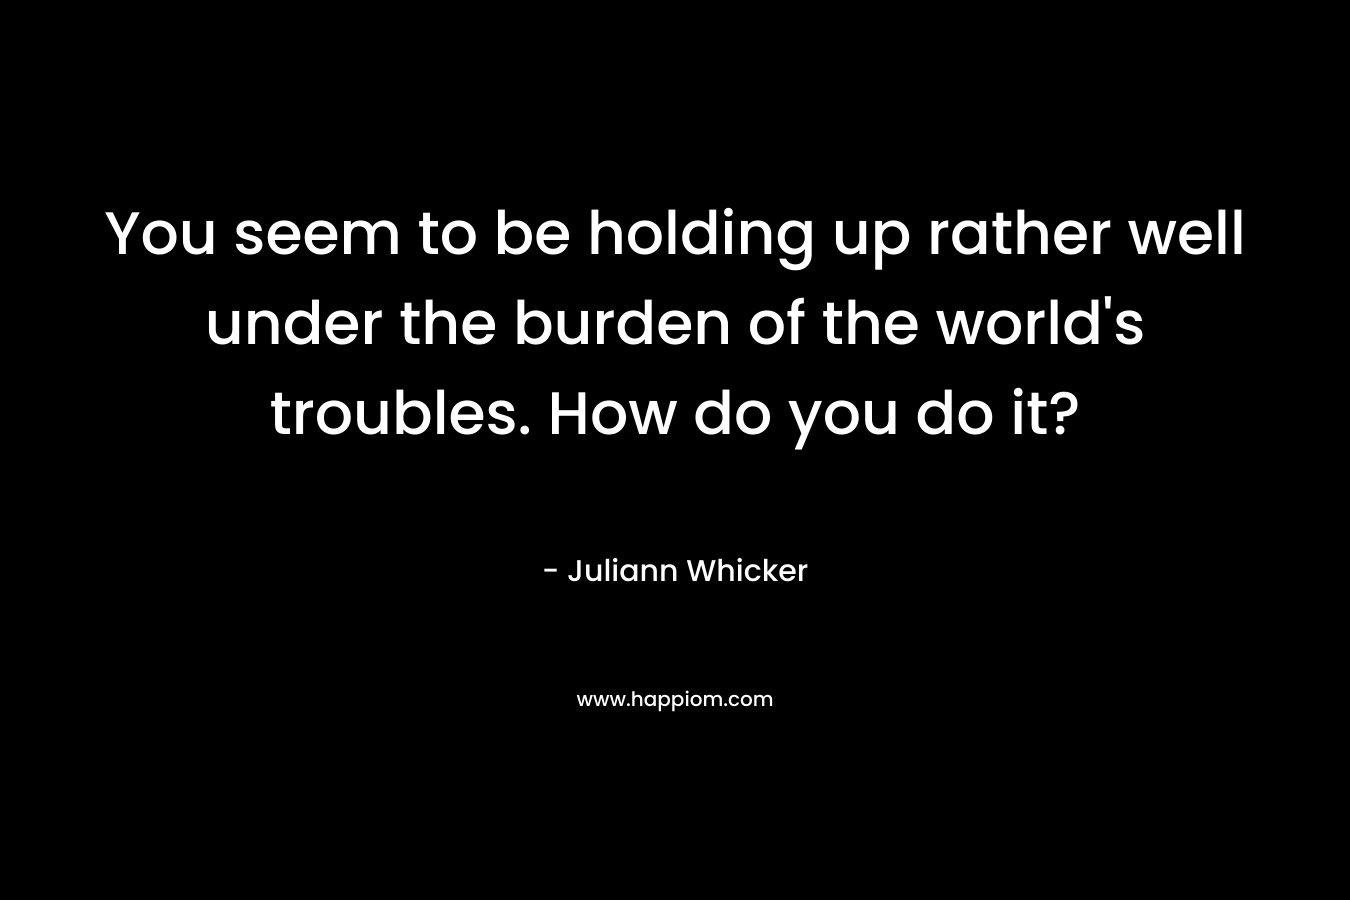 You seem to be holding up rather well under the burden of the world’s troubles. How do you do it? – Juliann Whicker